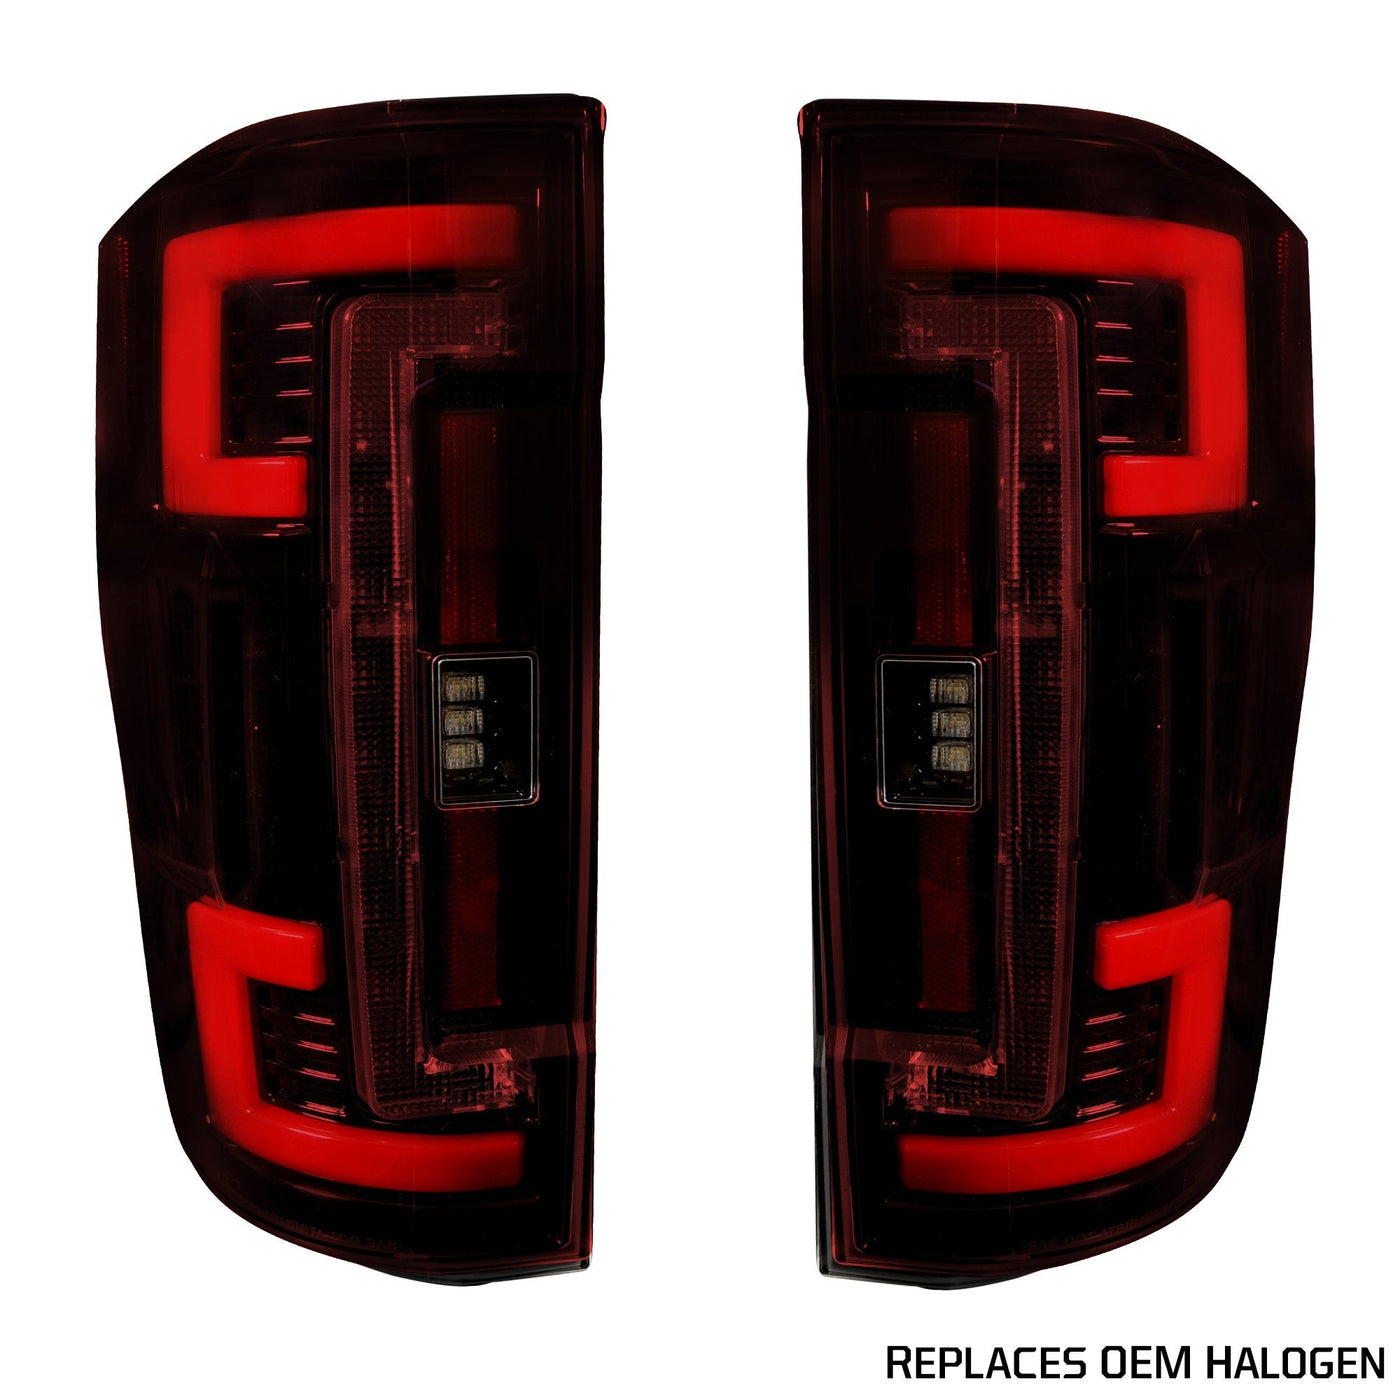 Ford Tail Lights, Ford Super Duty Tail Lights, Super Duty 17-19 Tail Lights, Tail Lights, Red Tail Lights, Ford F250 Tail Lights, Ford F350 Tail Lights, Ford F450 Tail Lights, Ford F550 Tail Lights